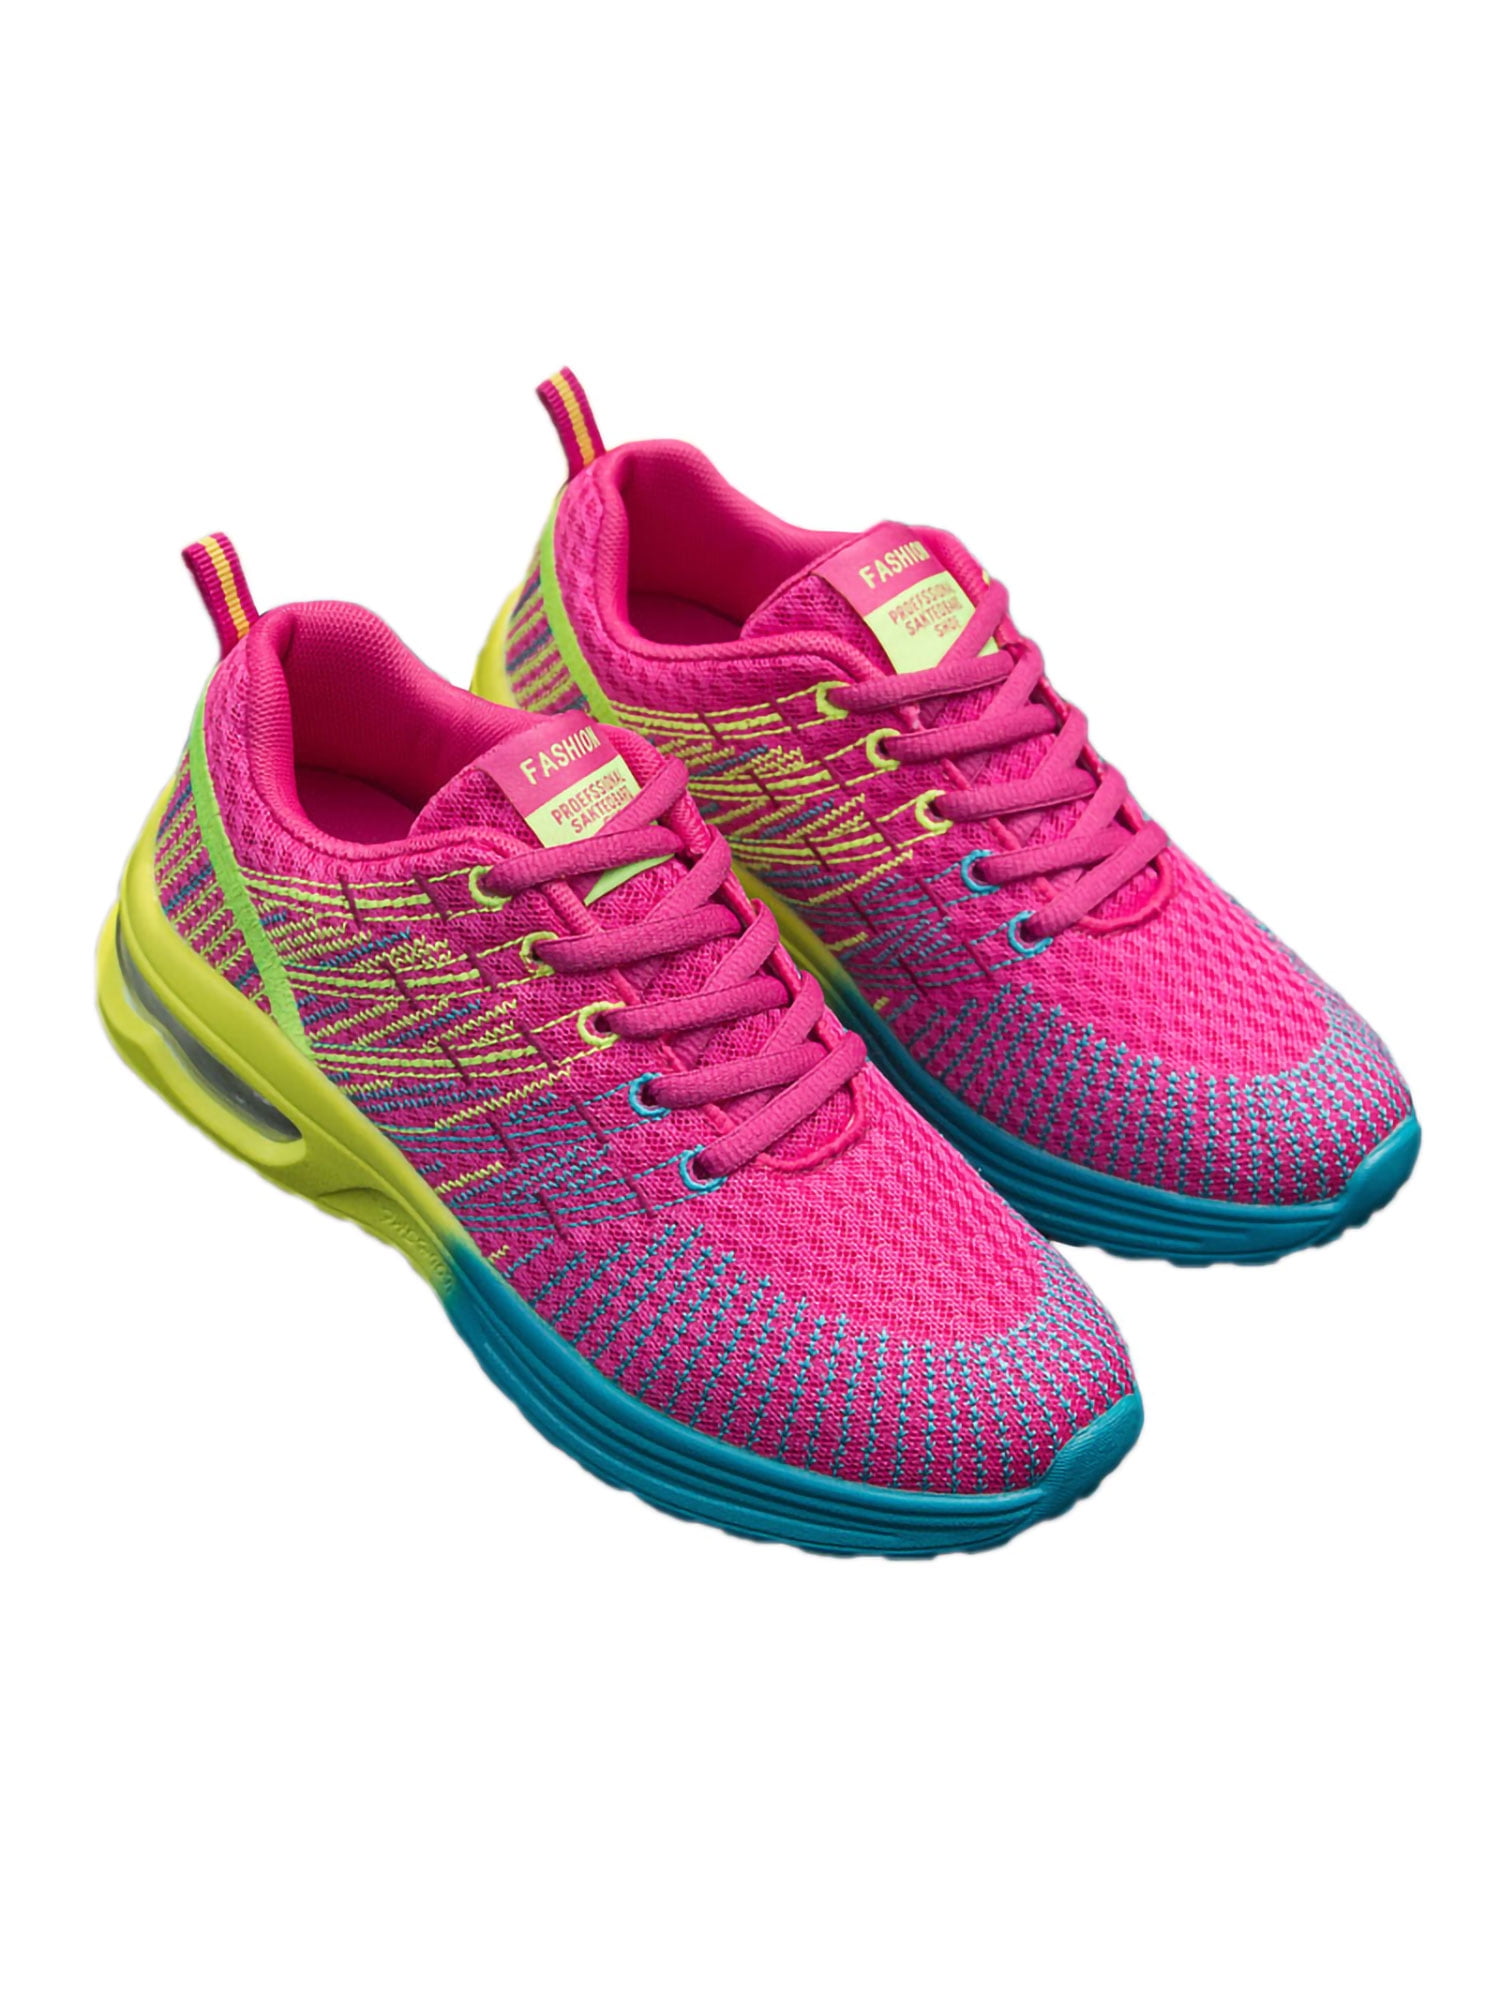 Women's Athletic Shoes Outdoor Air Cushion Running Sneakers Breathable Trainers